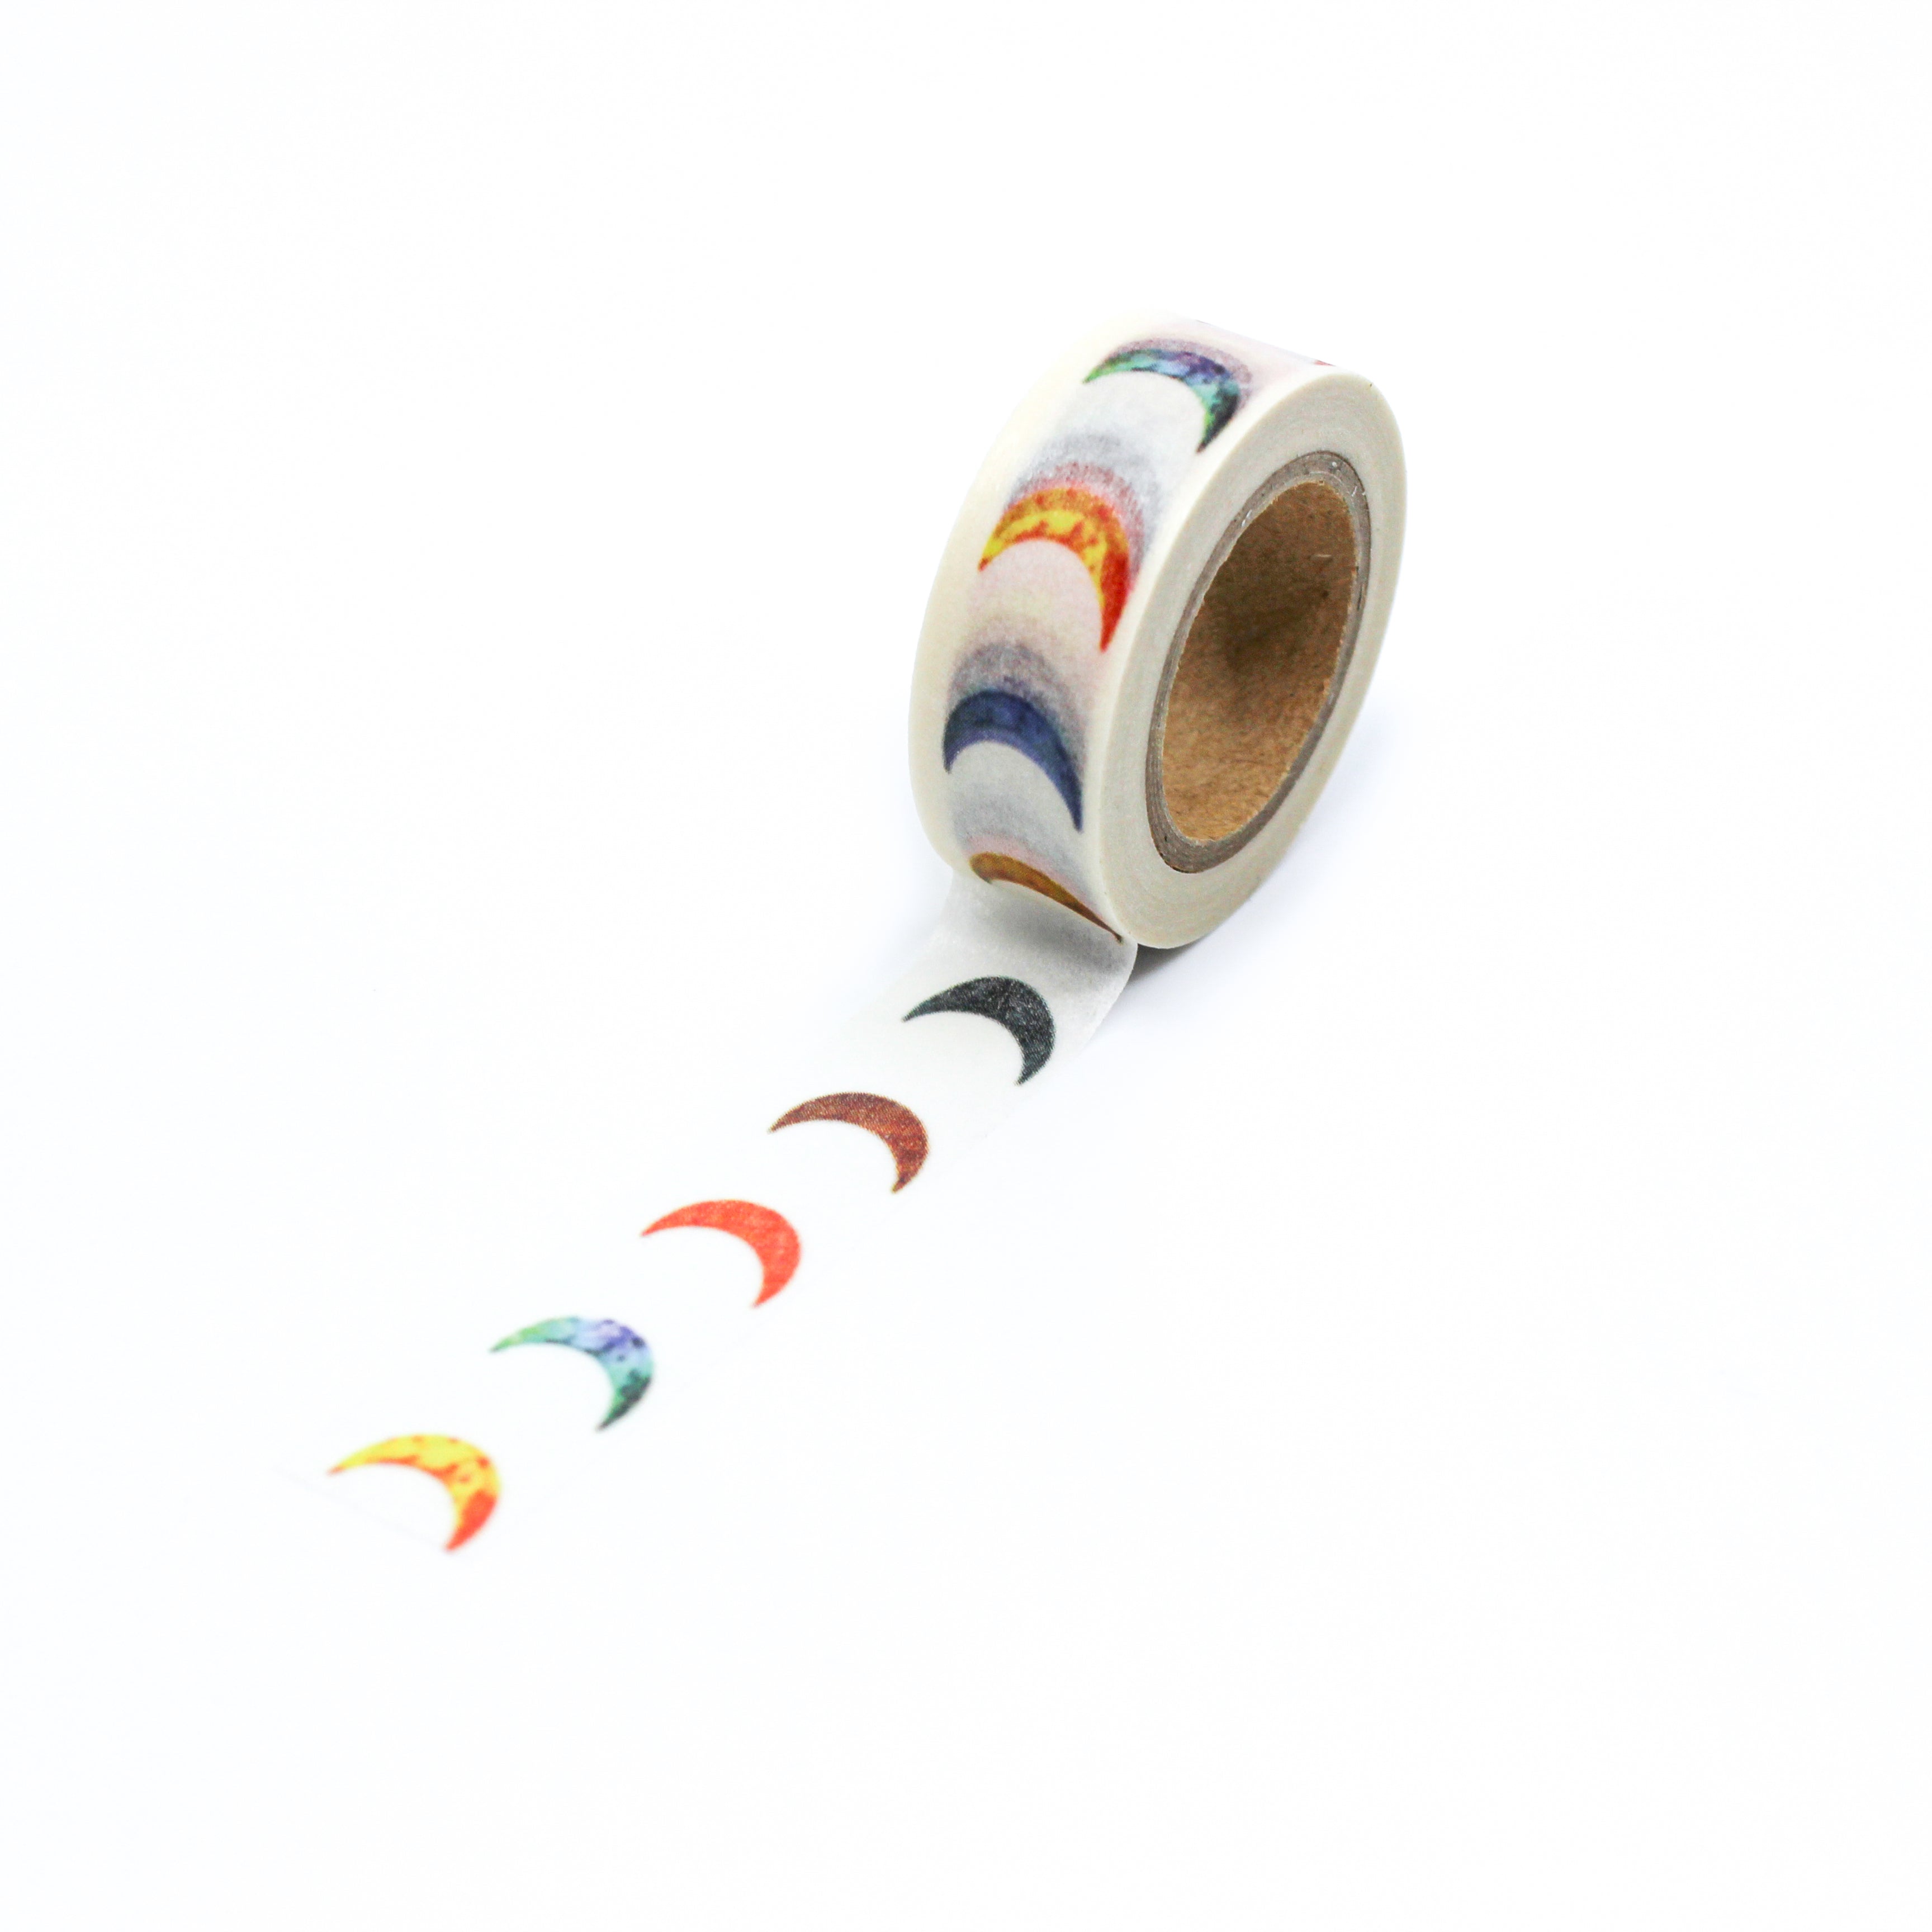 This is a full pattern repeat view of different color of crescent moon washi tape BBB Supplies Craft Shop